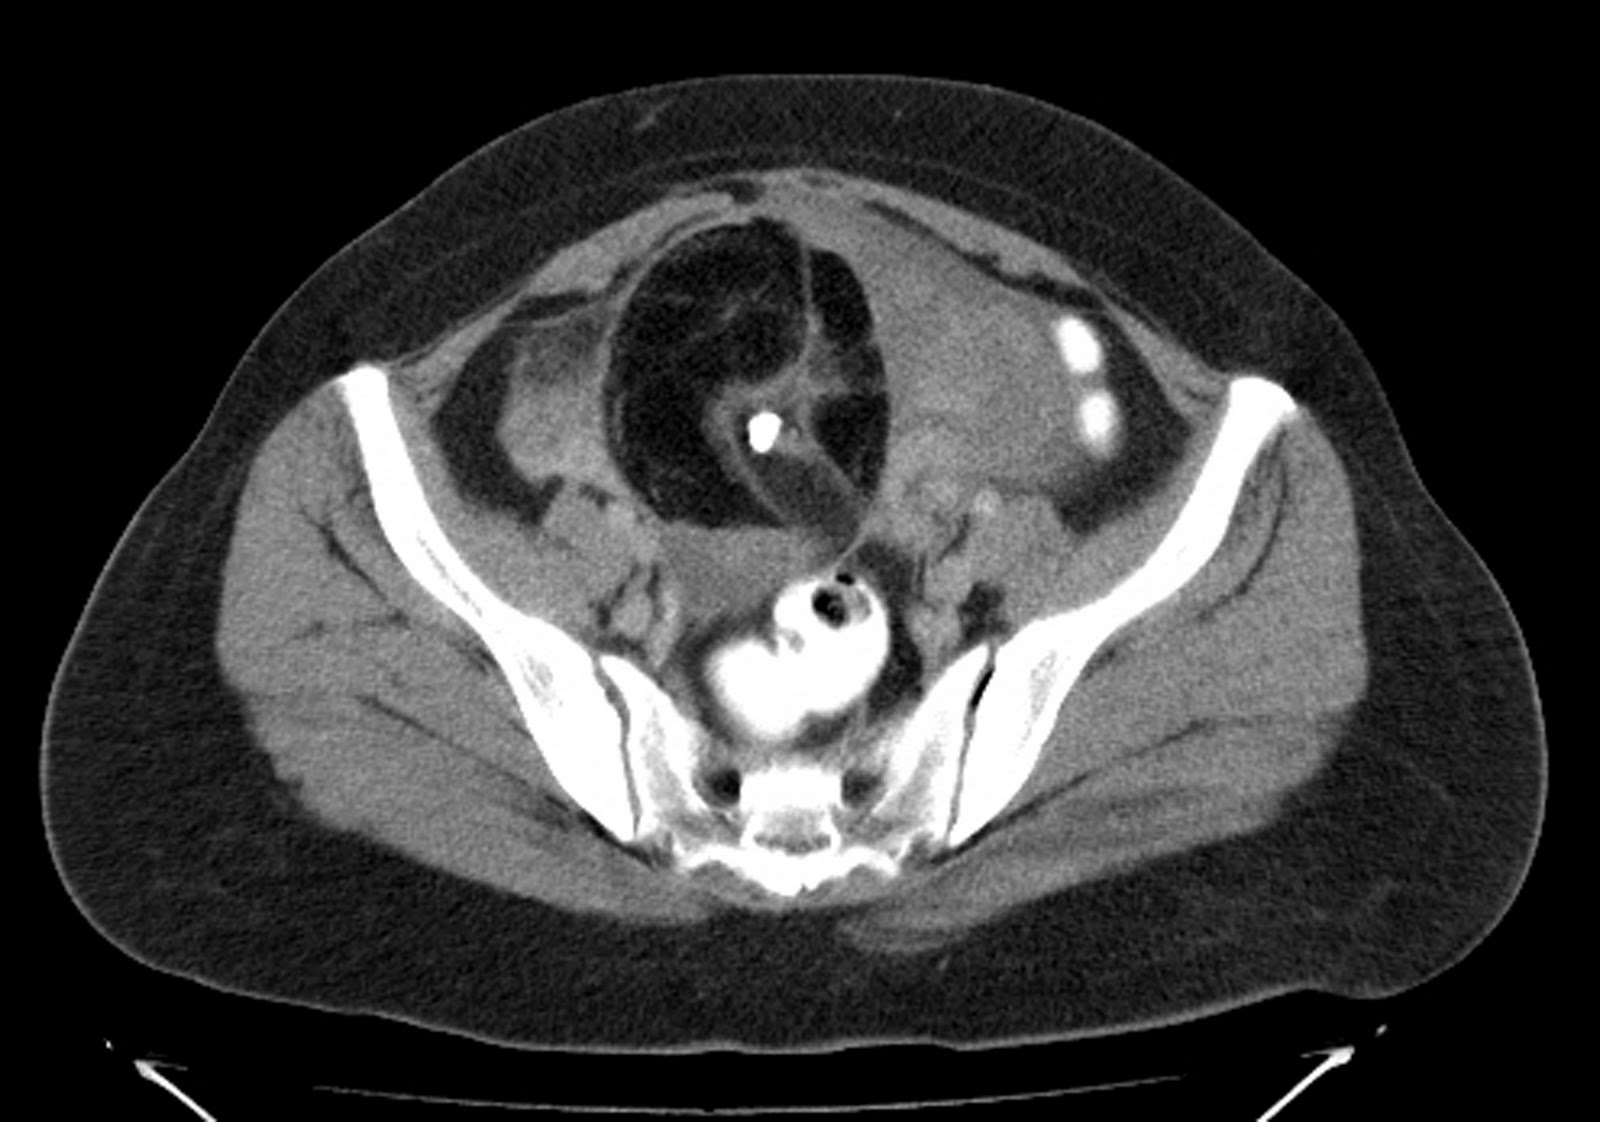 radiodiagnosis-imaging-is-amazing-interesting-cases-ovarian-dermoid-ct